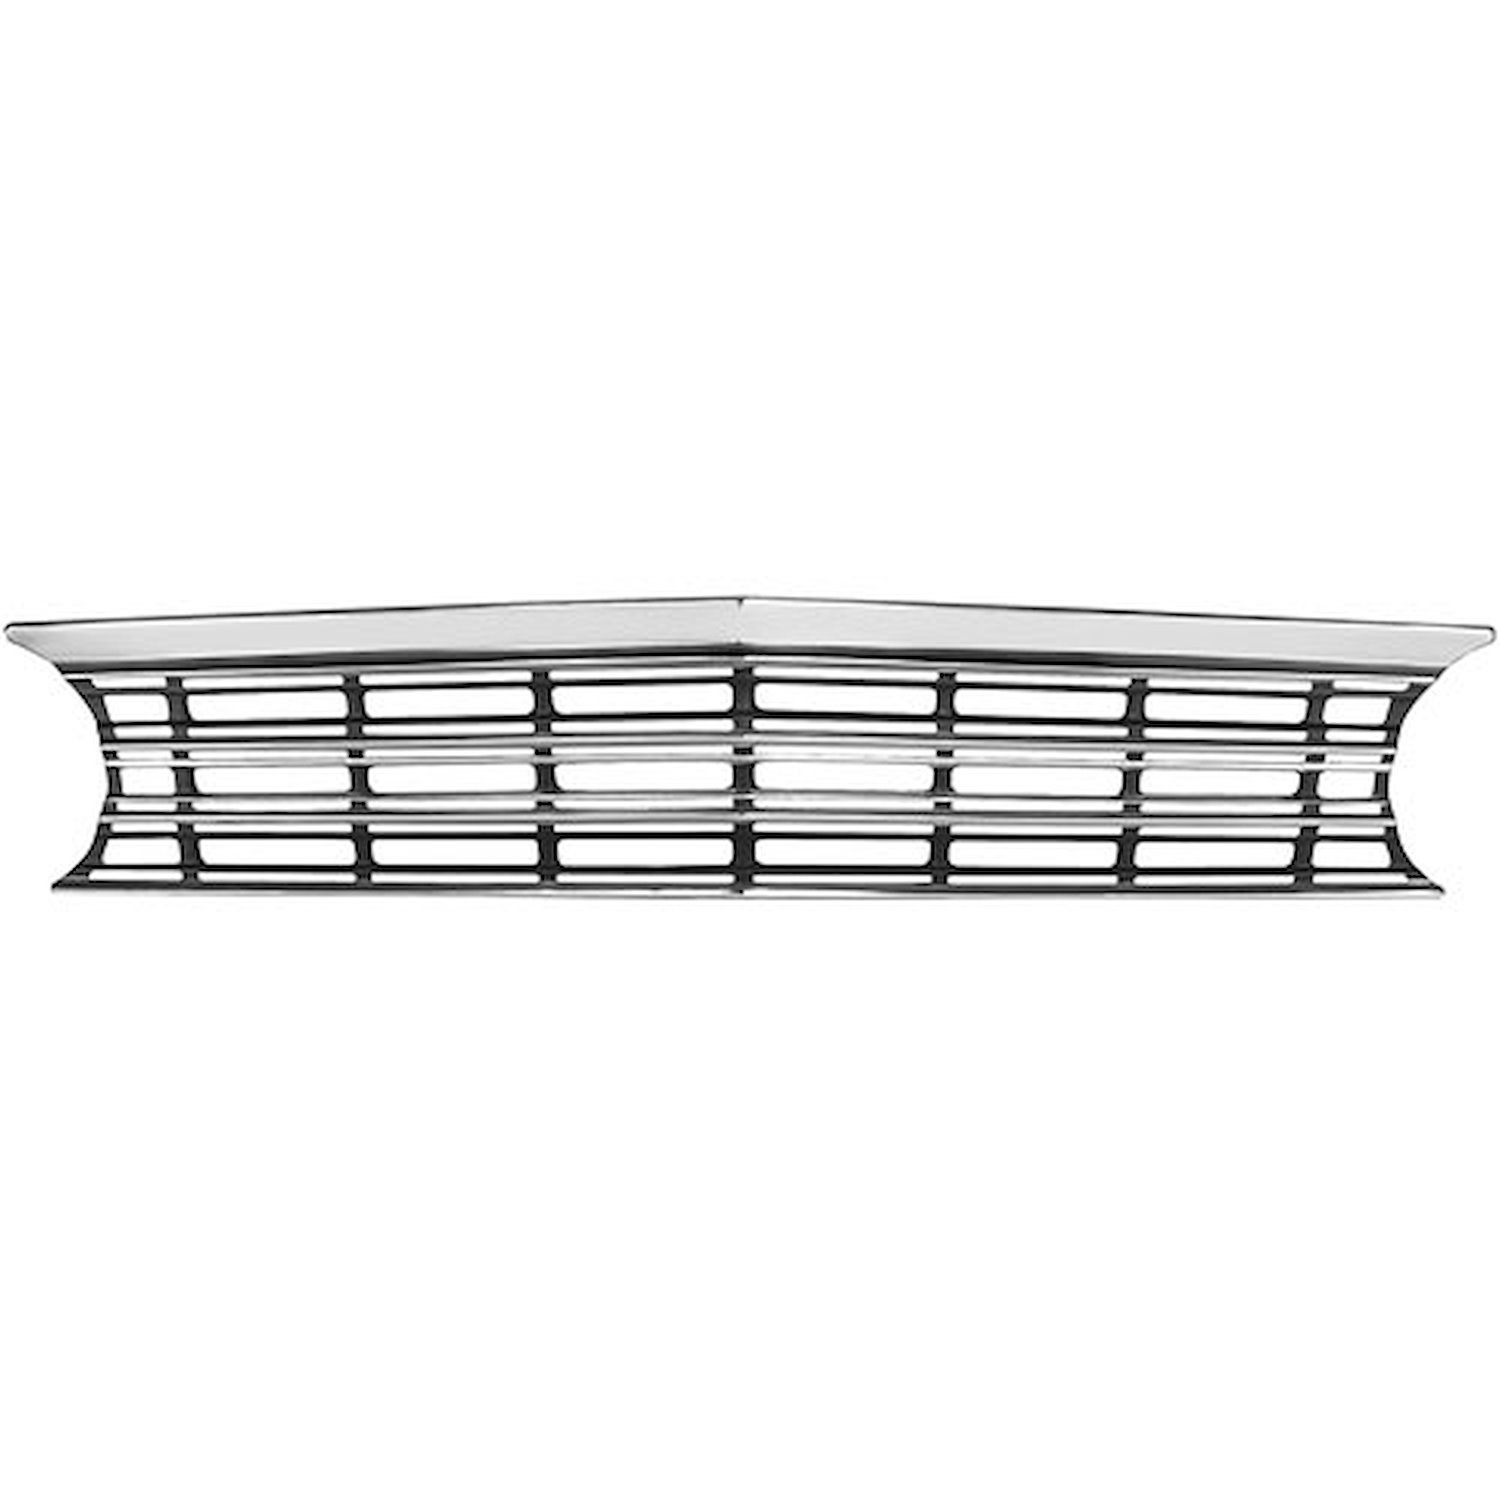 Grille for 1967 Chevy Chevelle SS, El Camino